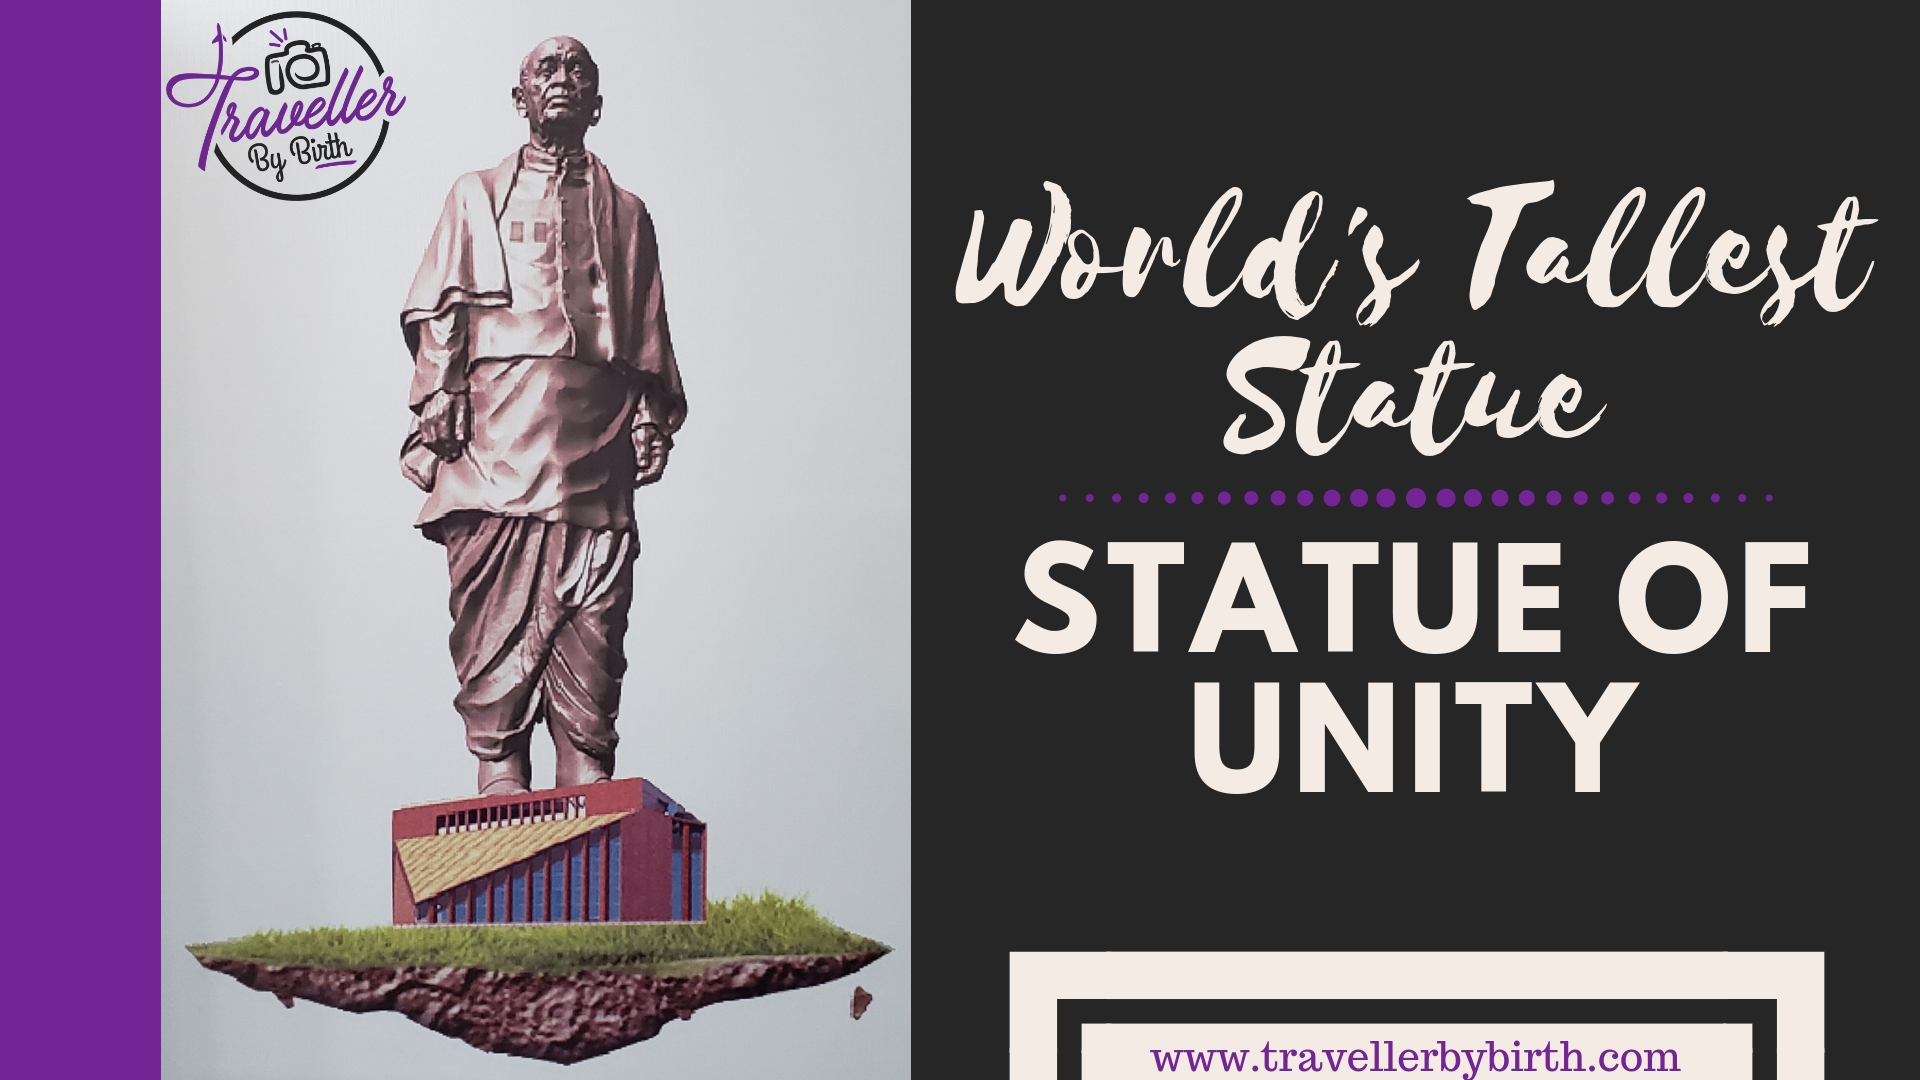 World’s Tallest Statue – Statue of Unity